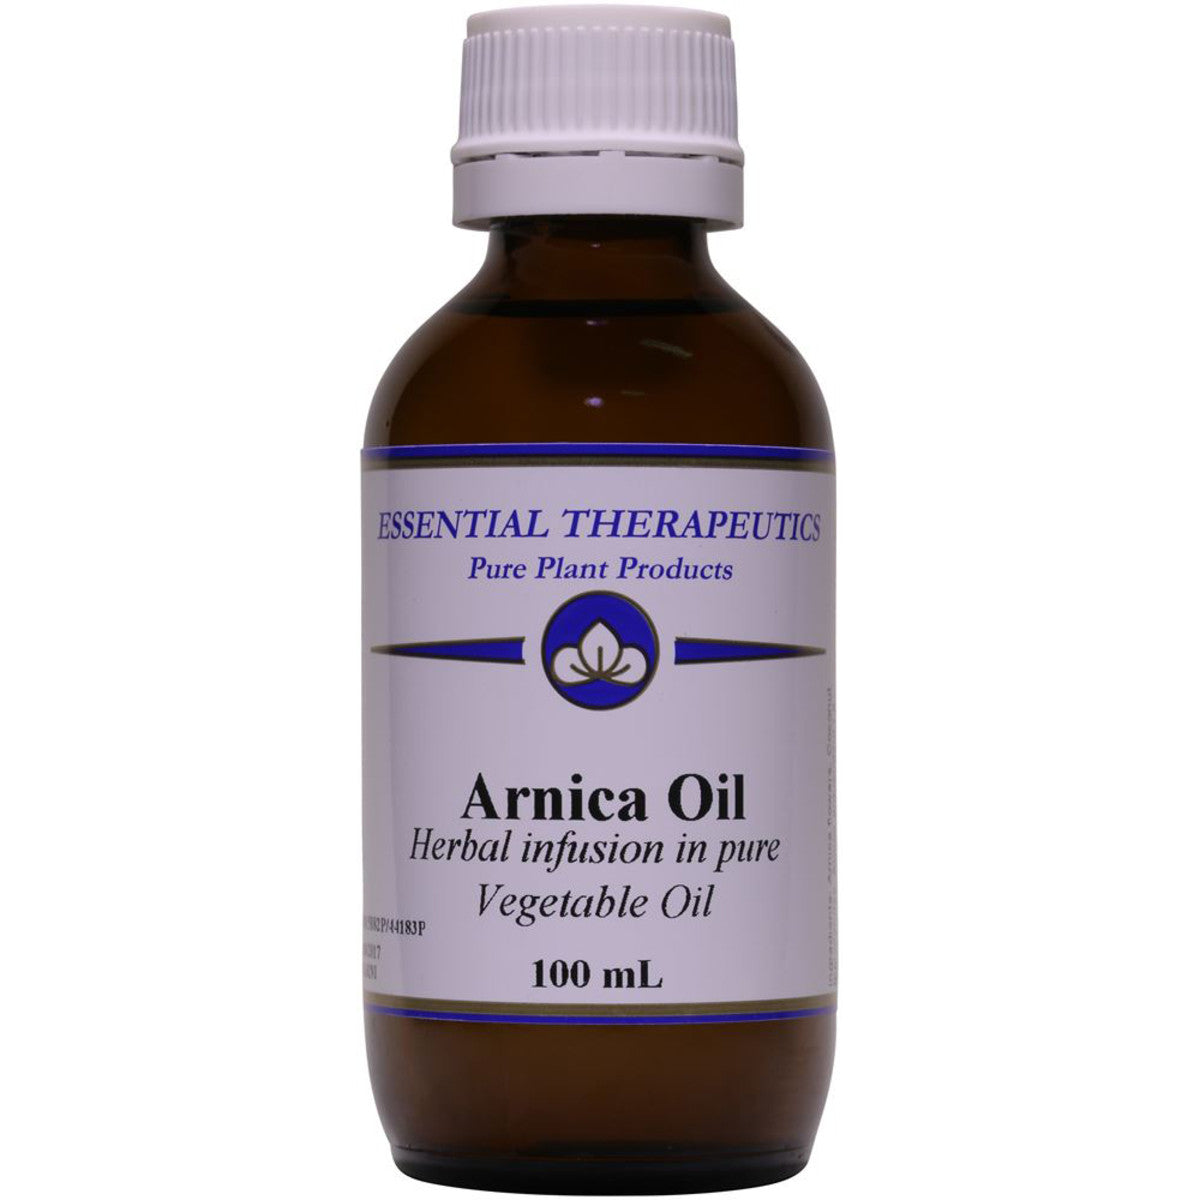 Essential Therapeutic - Infused Oil Arnica 100ml